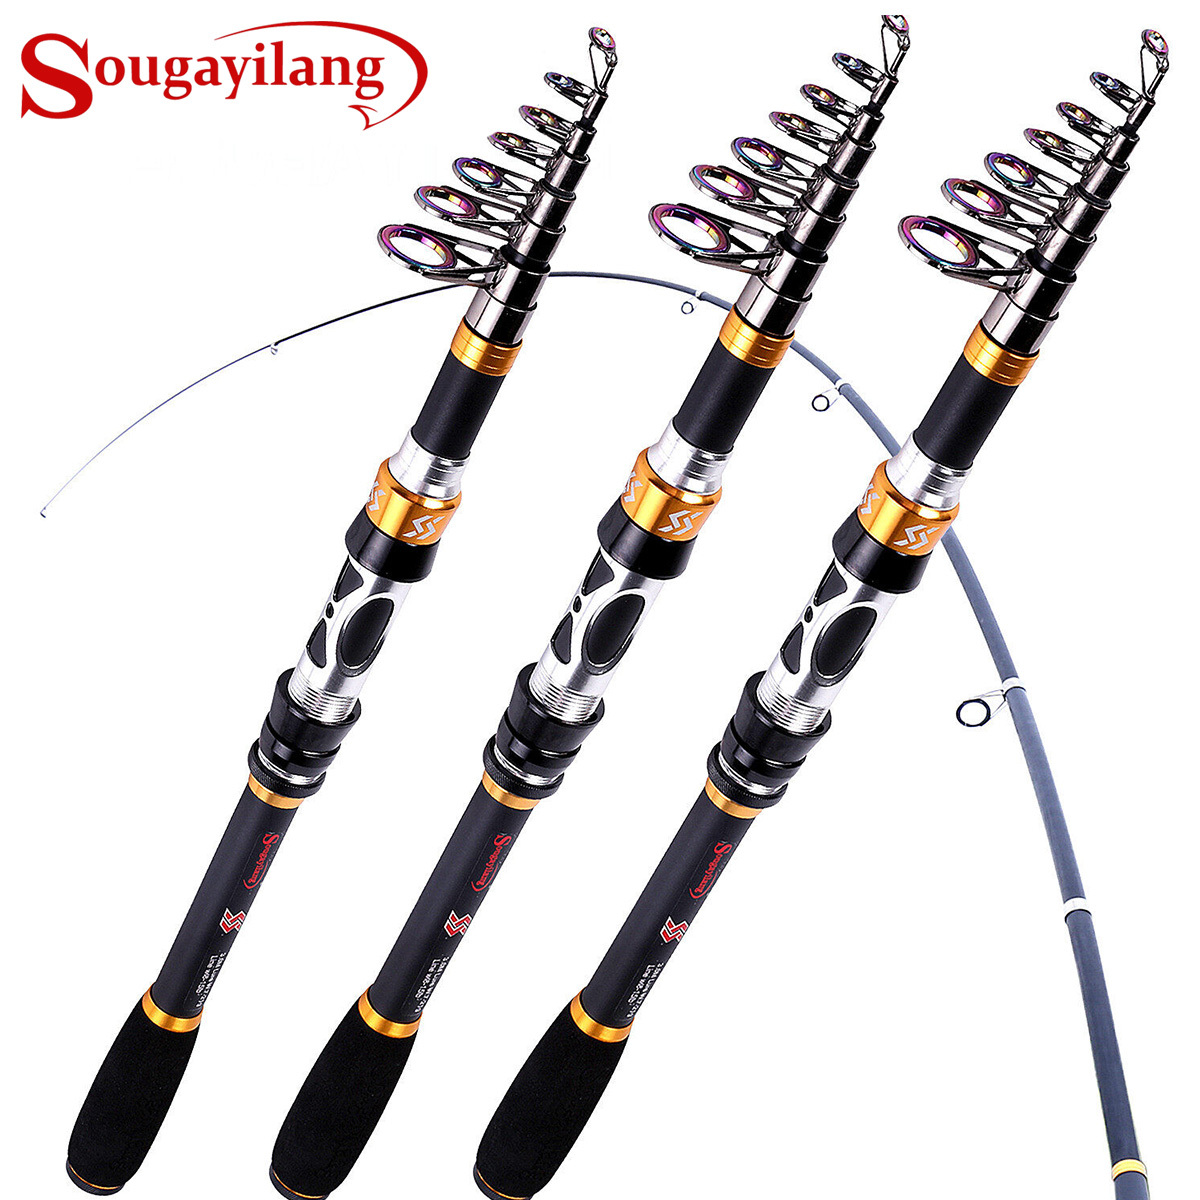 1pc Portable Retractable Fishing Rod - Perfect For Ice Fishing